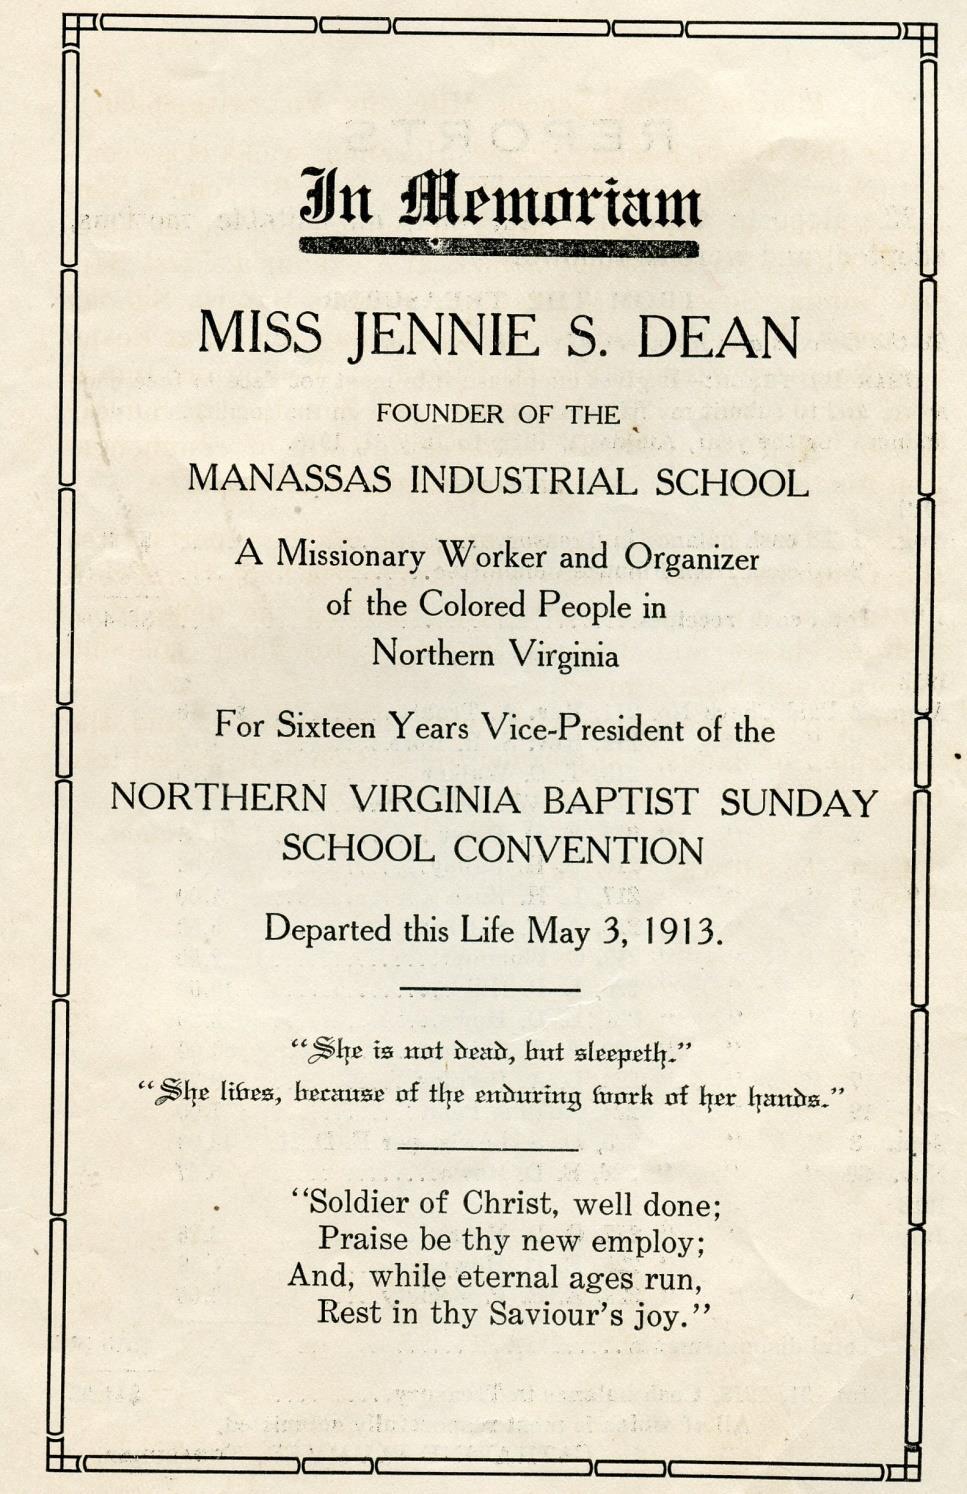 and $.50 for the Virginia Baptist State Sunday School Convention. Mary E. Dean was the Superintendent and Douglas Jackson was the Secretary (Church Convention Staff 1913).